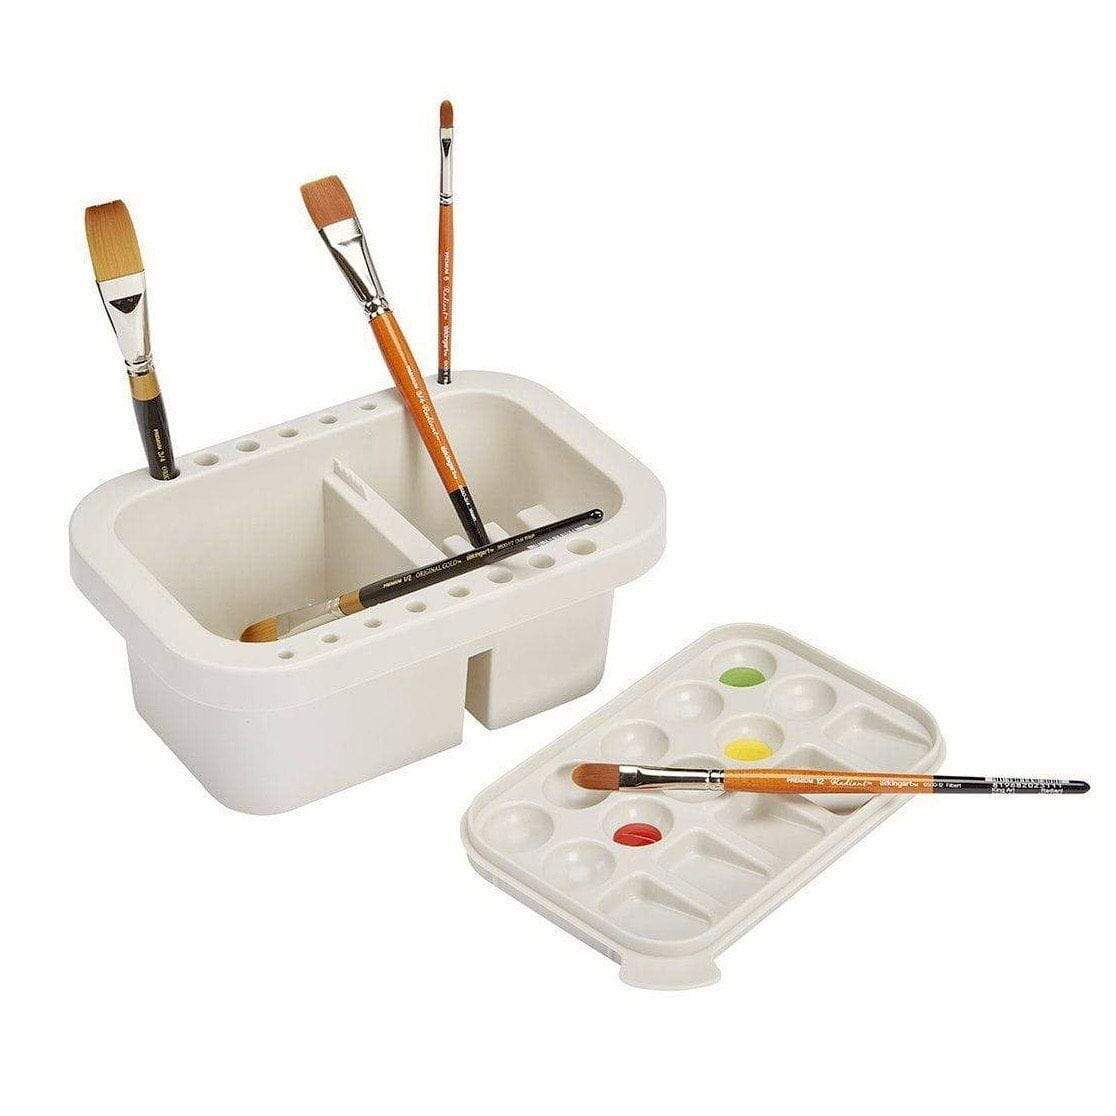 All in One, Travel-Friendly, 25-pc Oil Painting Art Set. Incl. Paints,  Brushes, Tabletop Easel, Palette and Accessories in Sturdy Carrying Case.  Great